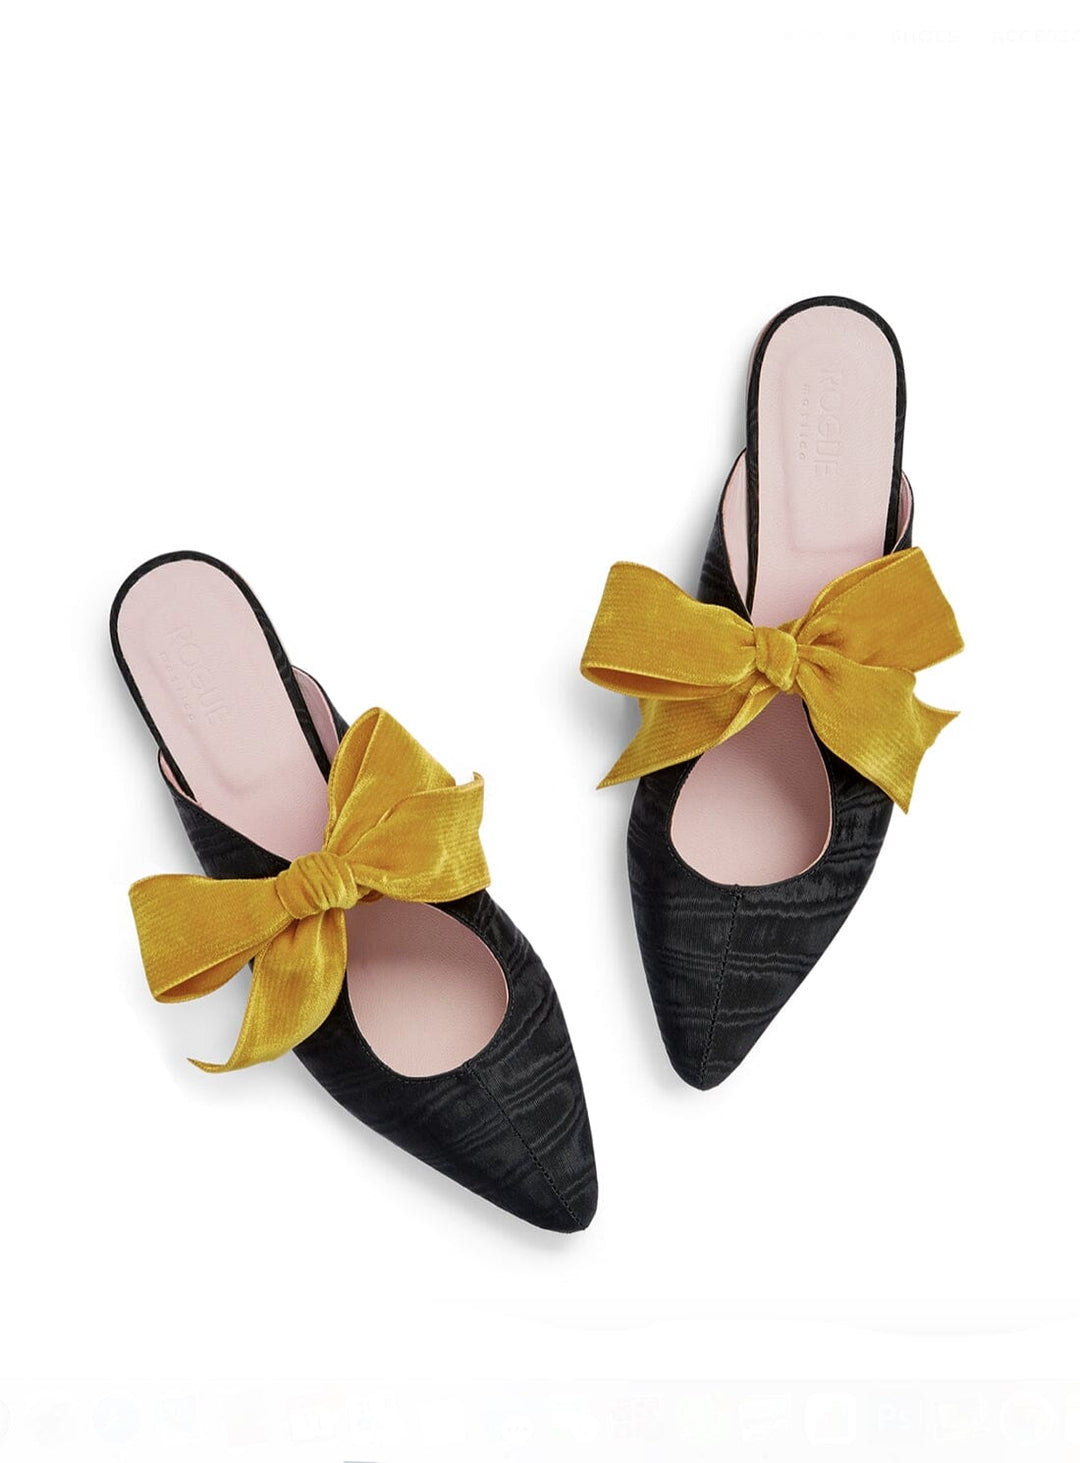 Sweetie Mule in Black Moire with Yellow Shoes YBDFinds 